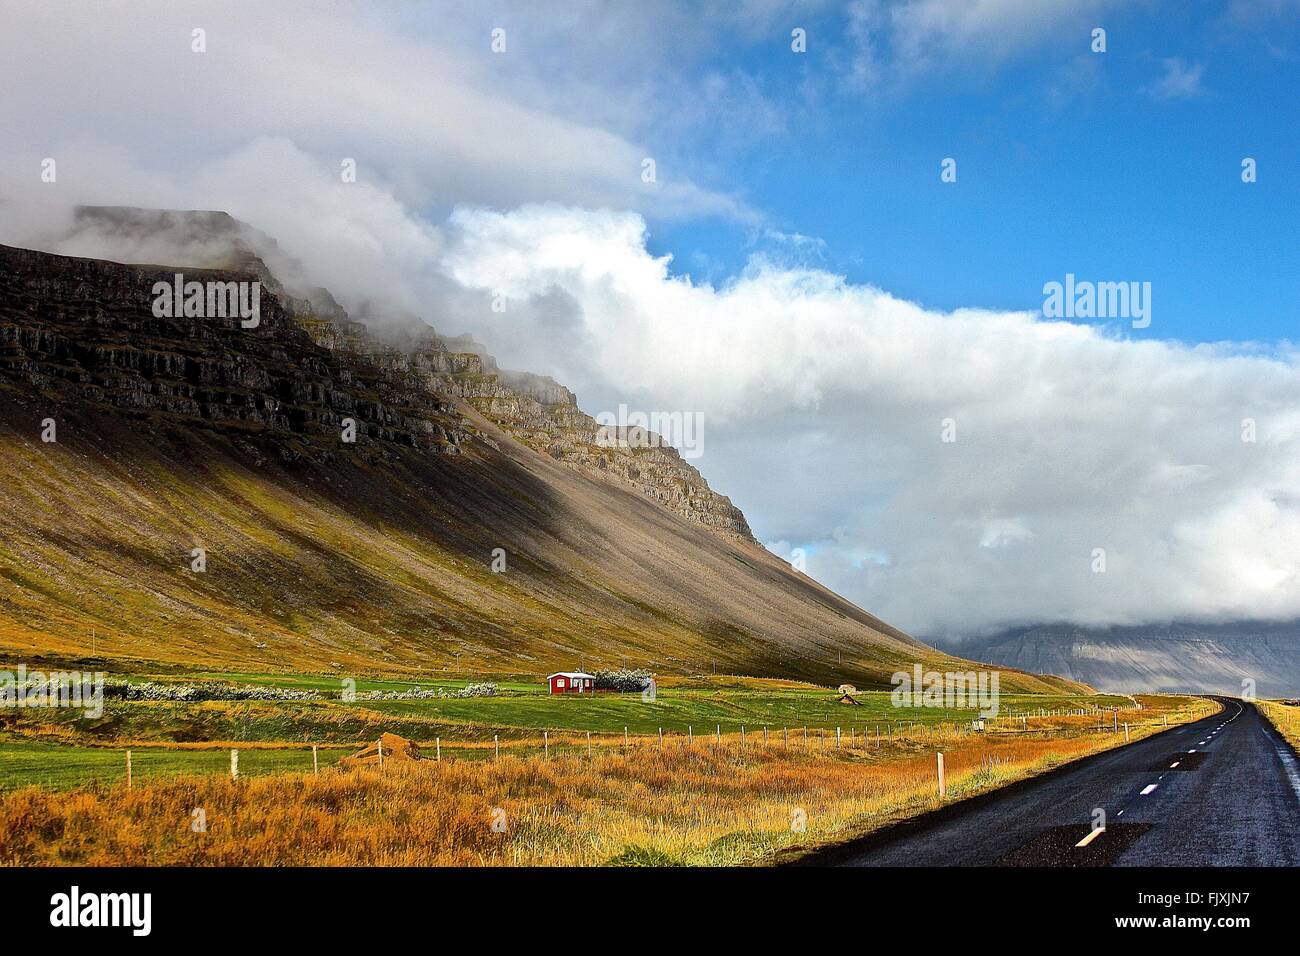 Idyllic View Of Mountain Against Cloudy Sky Stock Photo